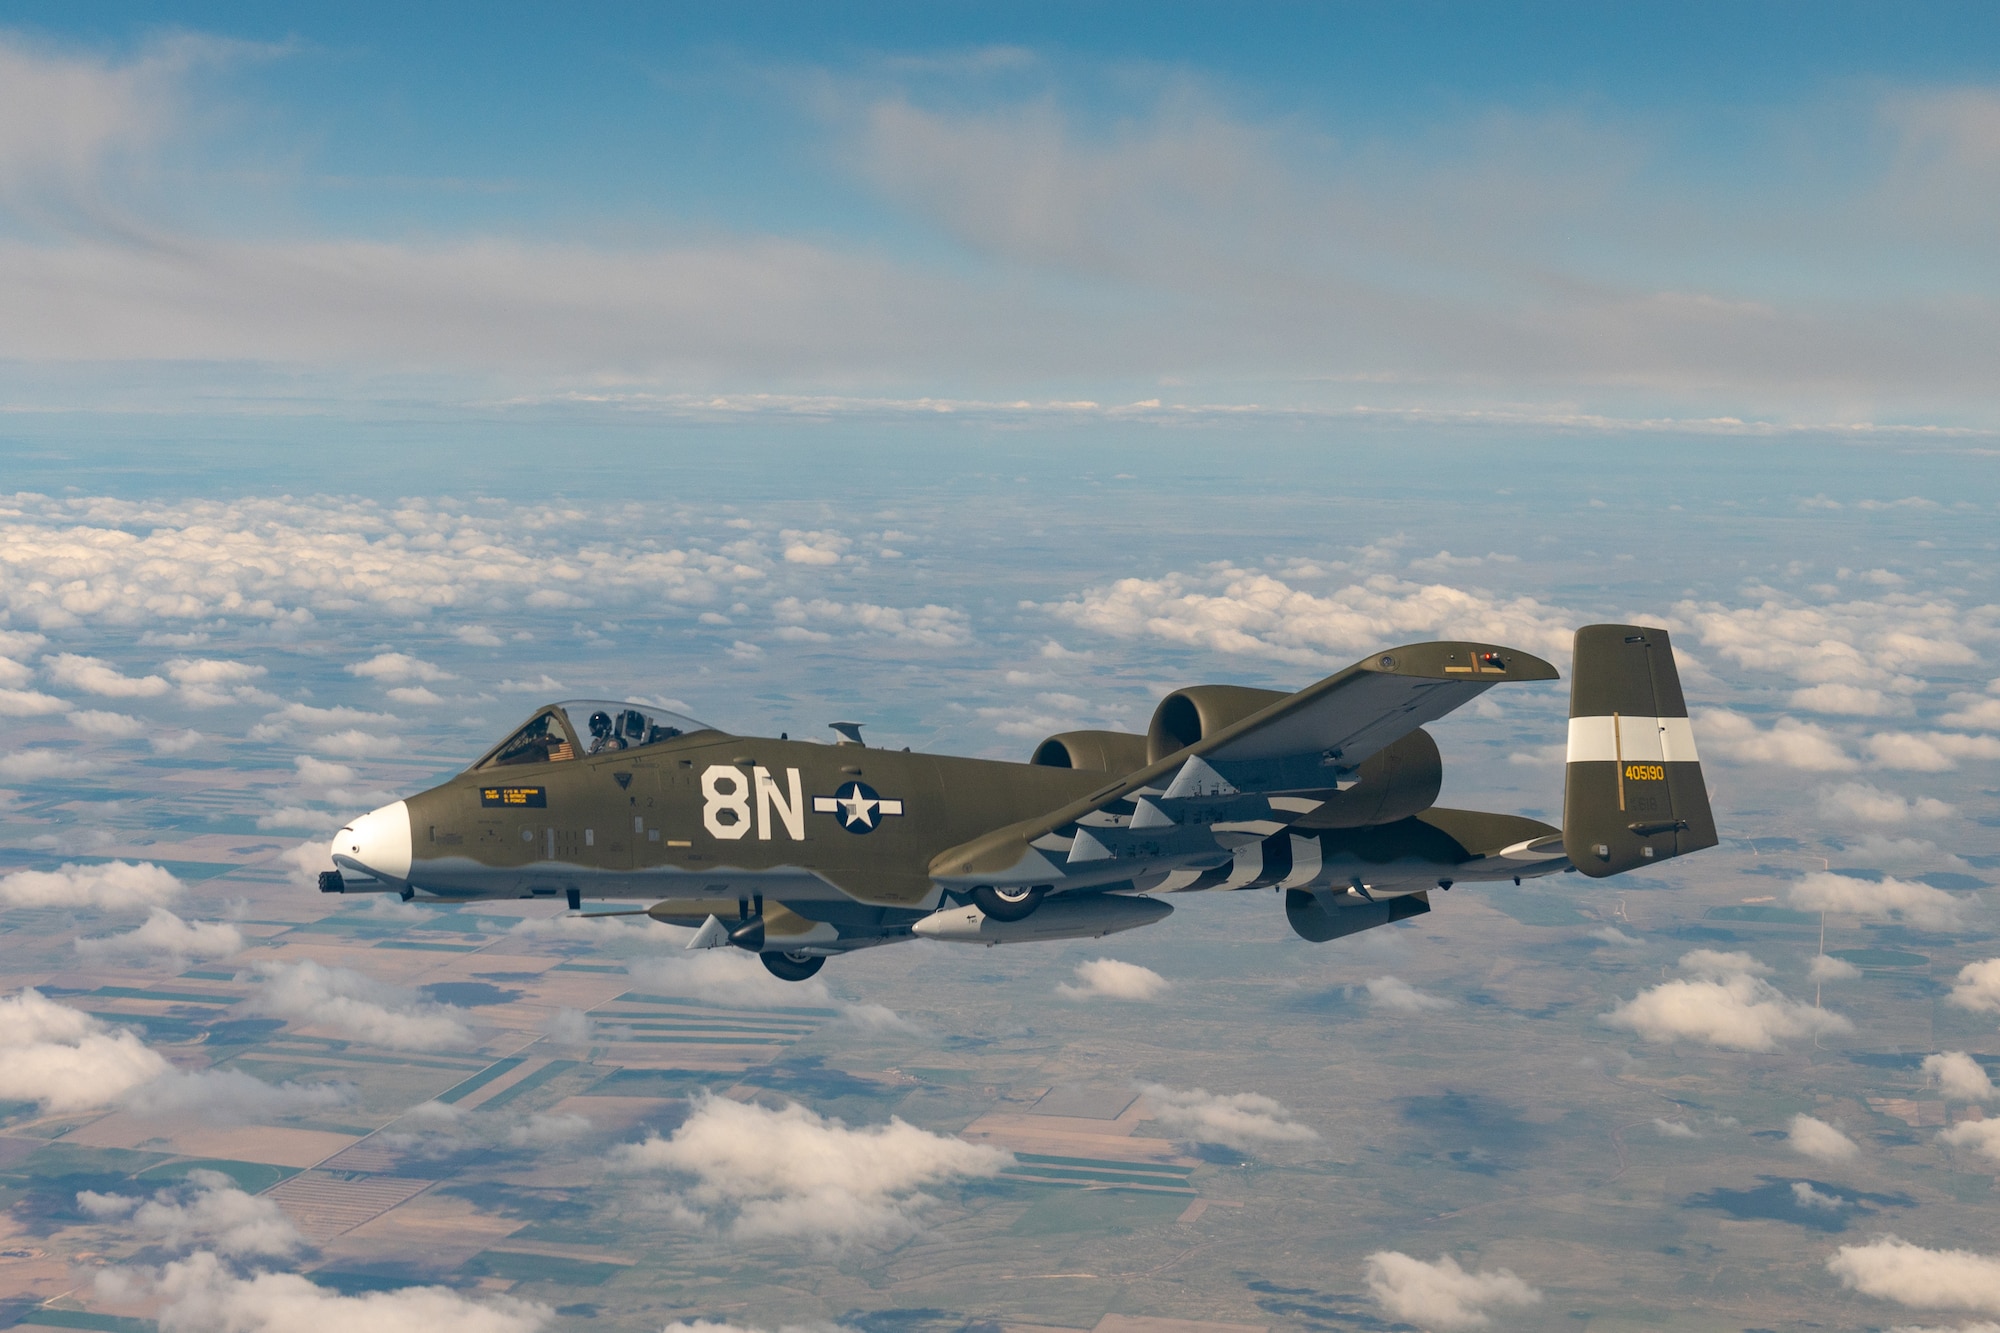 A pilot with the 190th Fighter Squadron, 124th Fighter Wing, Boise, Idaho, flies an A-10 Thunderbolt II with a newly painted World War II heritage paint scheme from the Air National Guard’s paint facility in Sioux City, Iowa to its new home at the Idaho Air National Guard, Gowen Field, Idaho, May 12, 2021. The heritage A-10 aircraft was painted to commemorate the 190FS’s 75th Anniversary and made to mimic the 1944 version of the P-47 Thunderbolt flown in WWII by the 405th Fighter Squadron, which was later re-designated as the 190FS. (U.S. Air National Guard photo by Staff Sgt Mercedee Wilds)